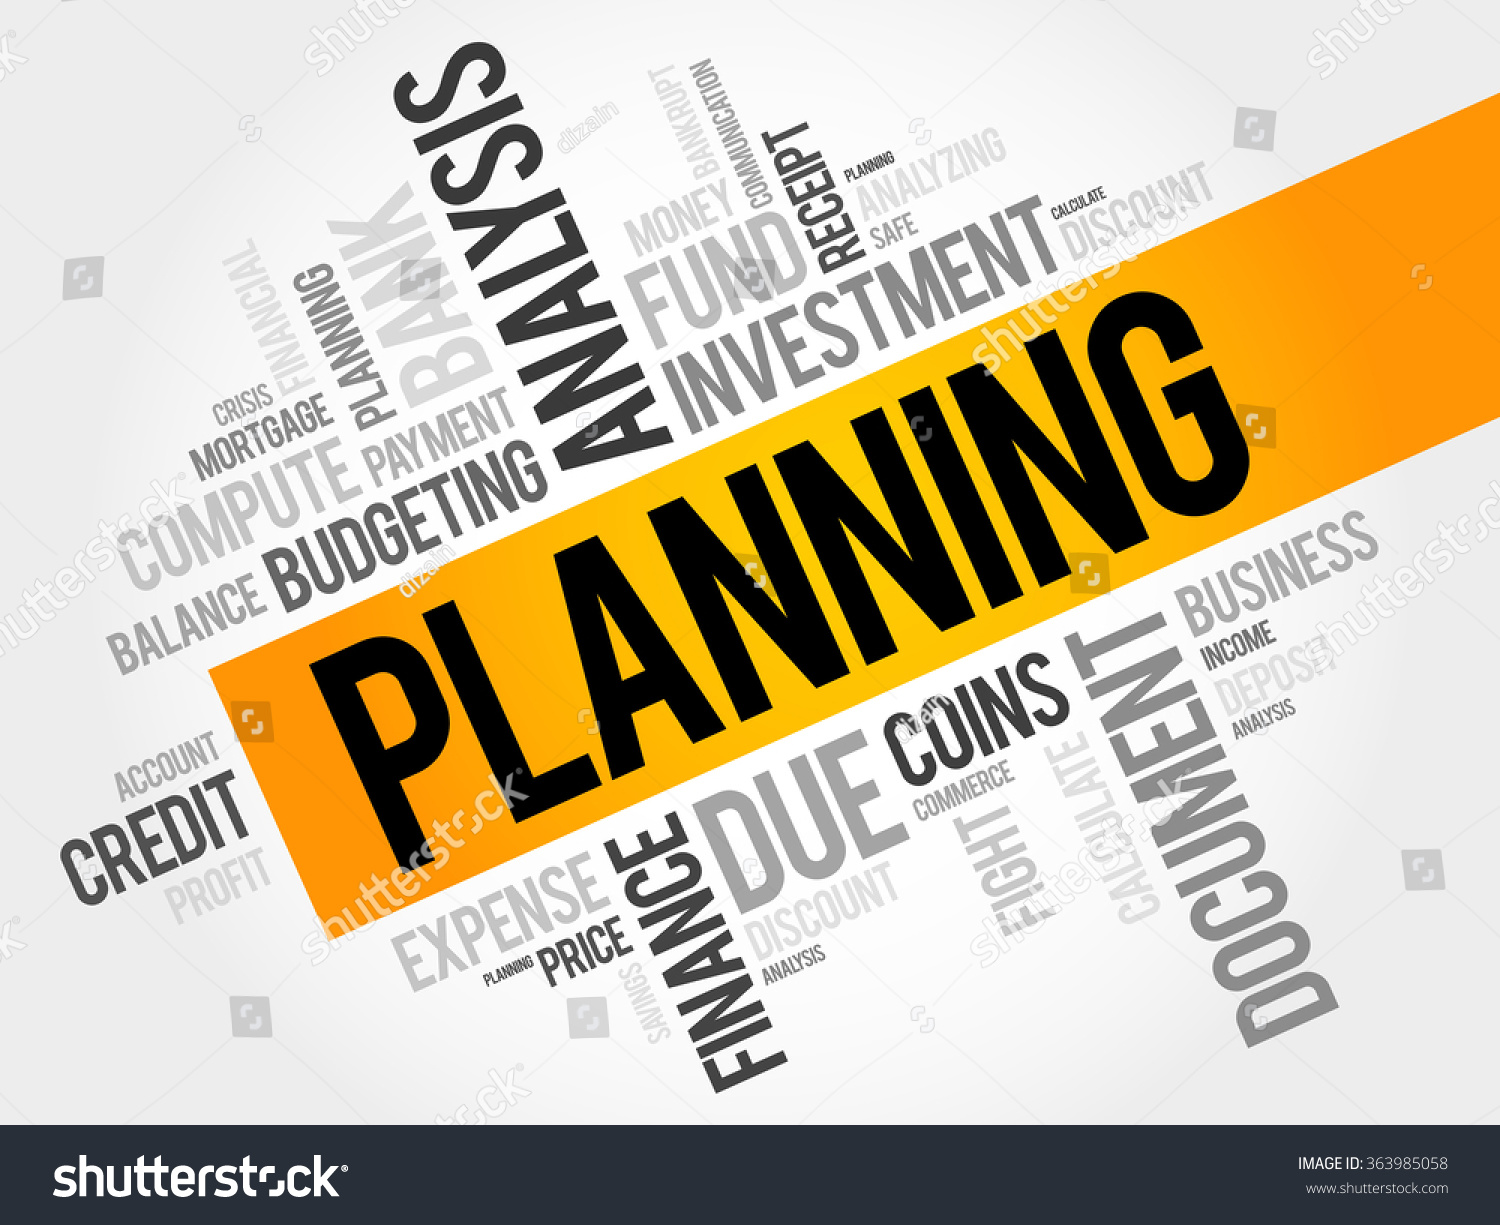 planning-word-cloud-business-concept-stock-illustration-363985058